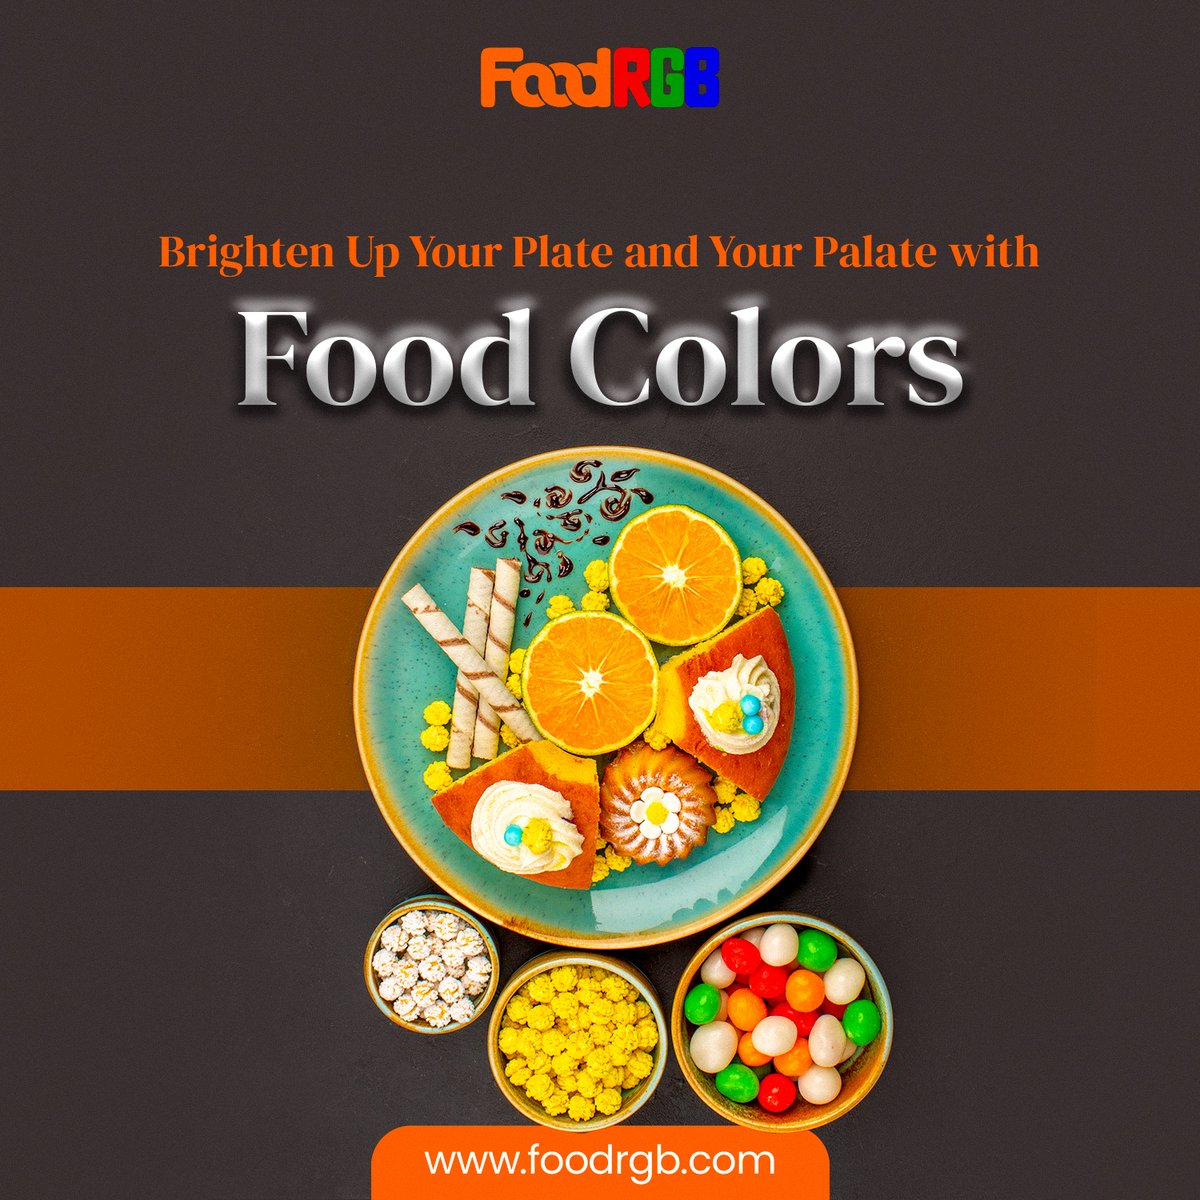 Enhance the beauty and flavor of your dishes with FoodRGB's range of natural food colors!  Let every bite be a colorful adventure.

Explore now at foodrgb.com

#naturalfoodcolors #colorfuladventure #cookingessentials #foodart #foodies #culinarycreativity #foodrgb